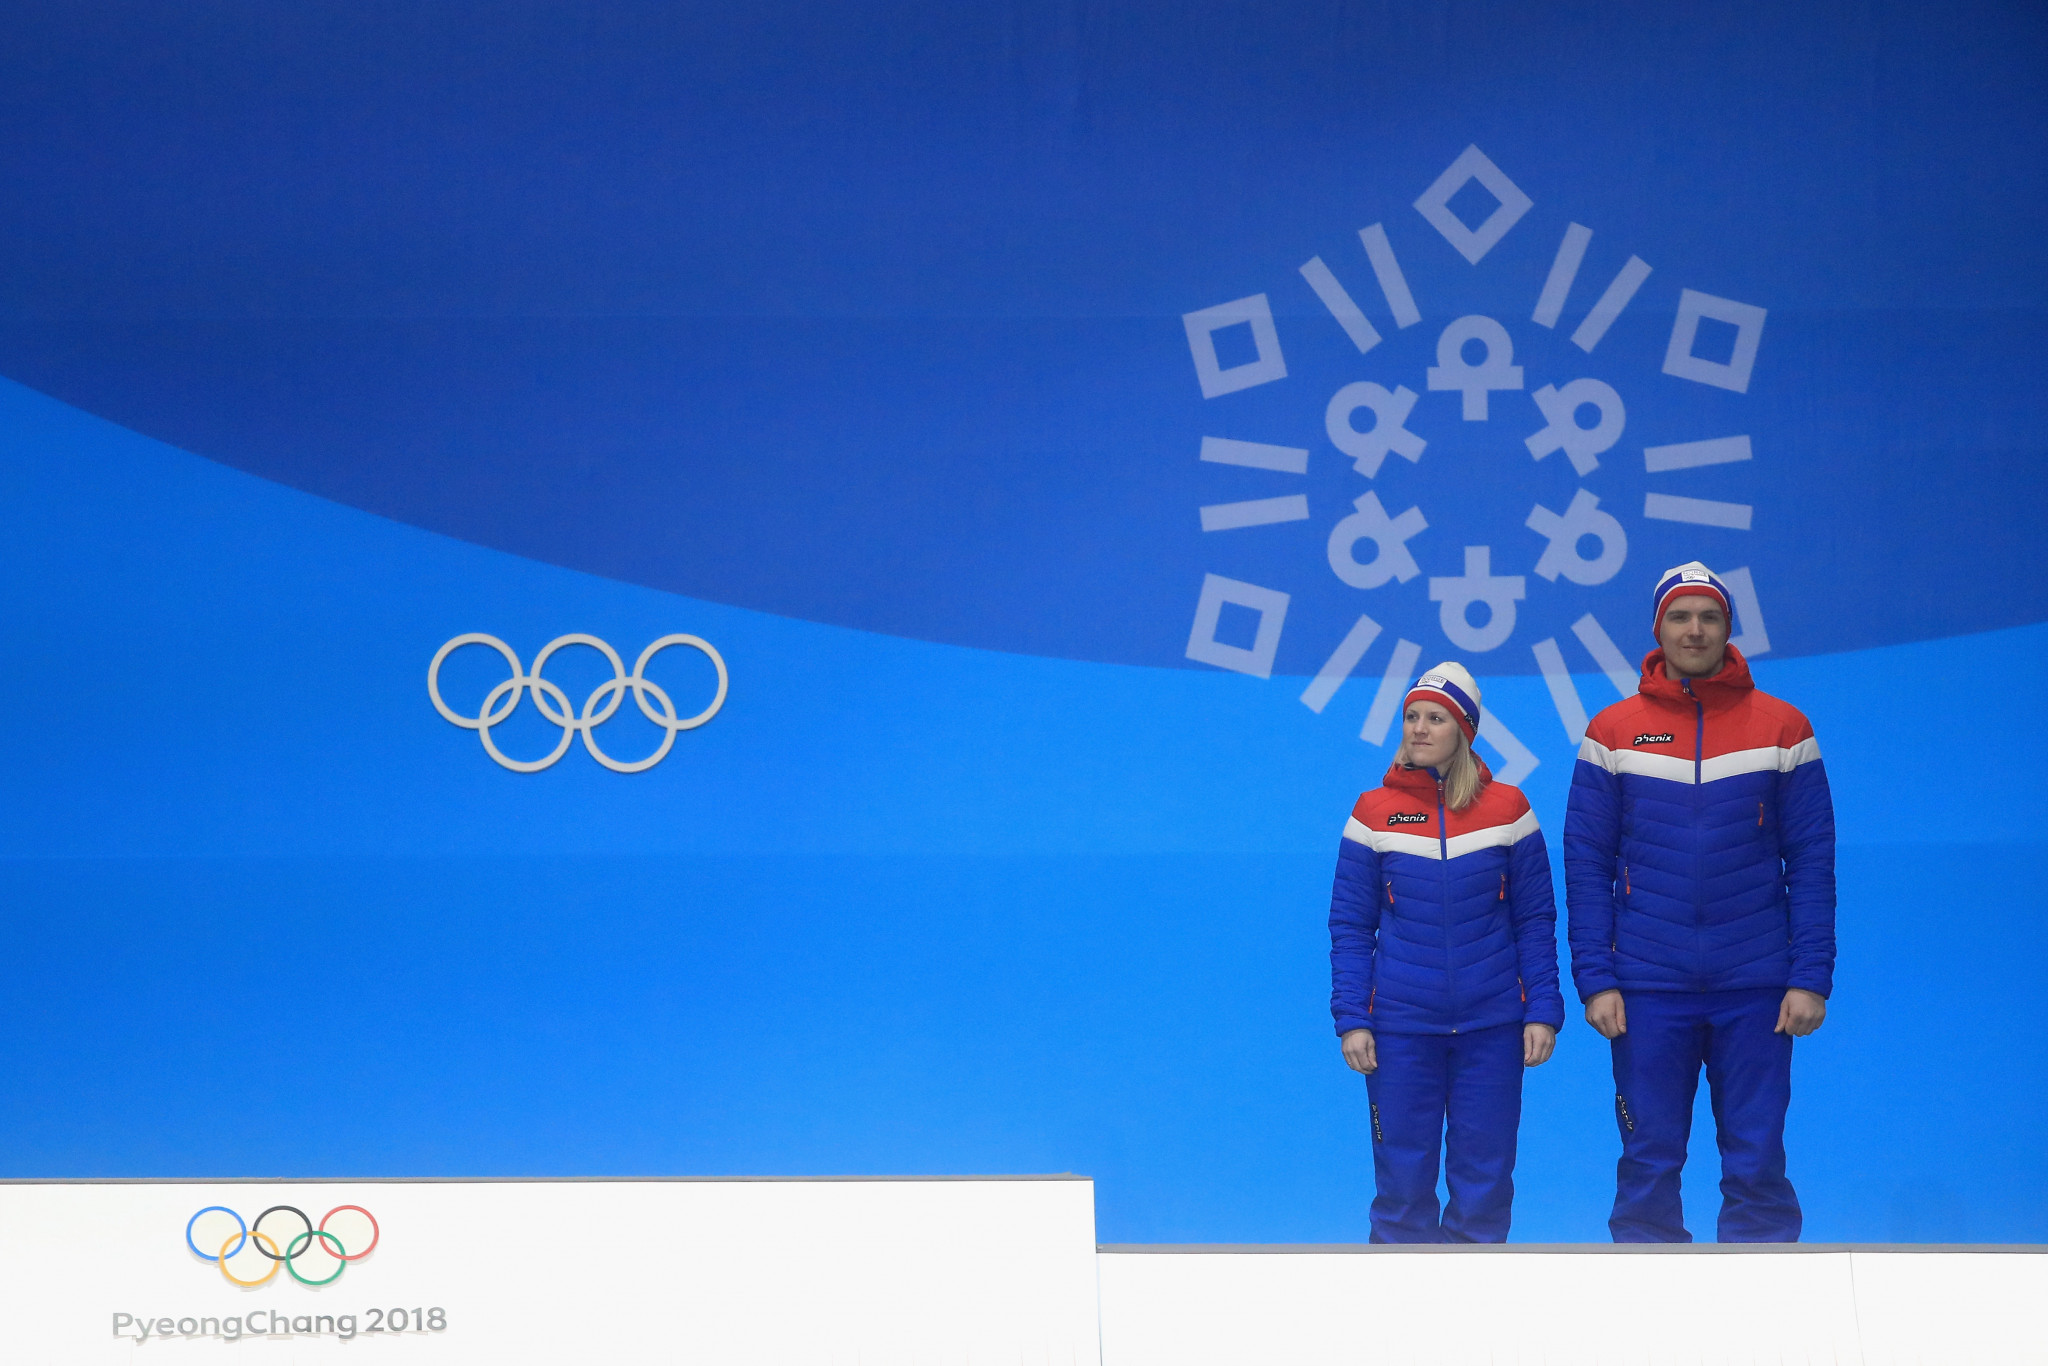 Norway's Kristin Skaslien and Magnus Nedregotten were swiftly re-allocated curling bronze medals from Pyeongchang 2018 after their Russian rivals Aleksandr Krushelnitckii and Anastasia Bryzgalova were stripped of them following a positive doping case  ©Getty Images